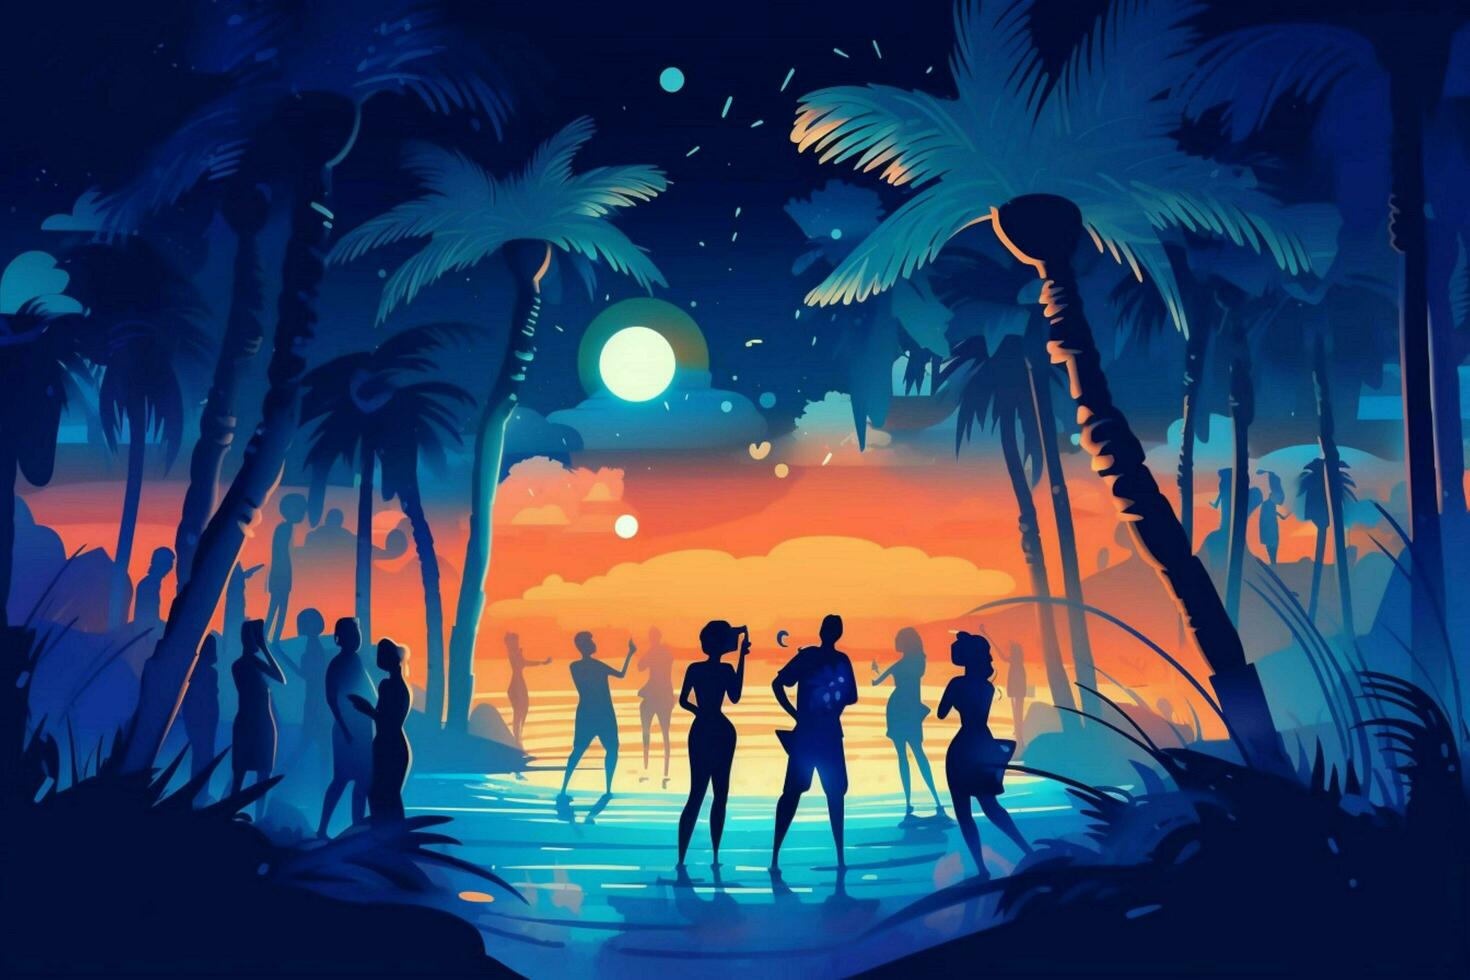 the image shows a night beach party with music an photo